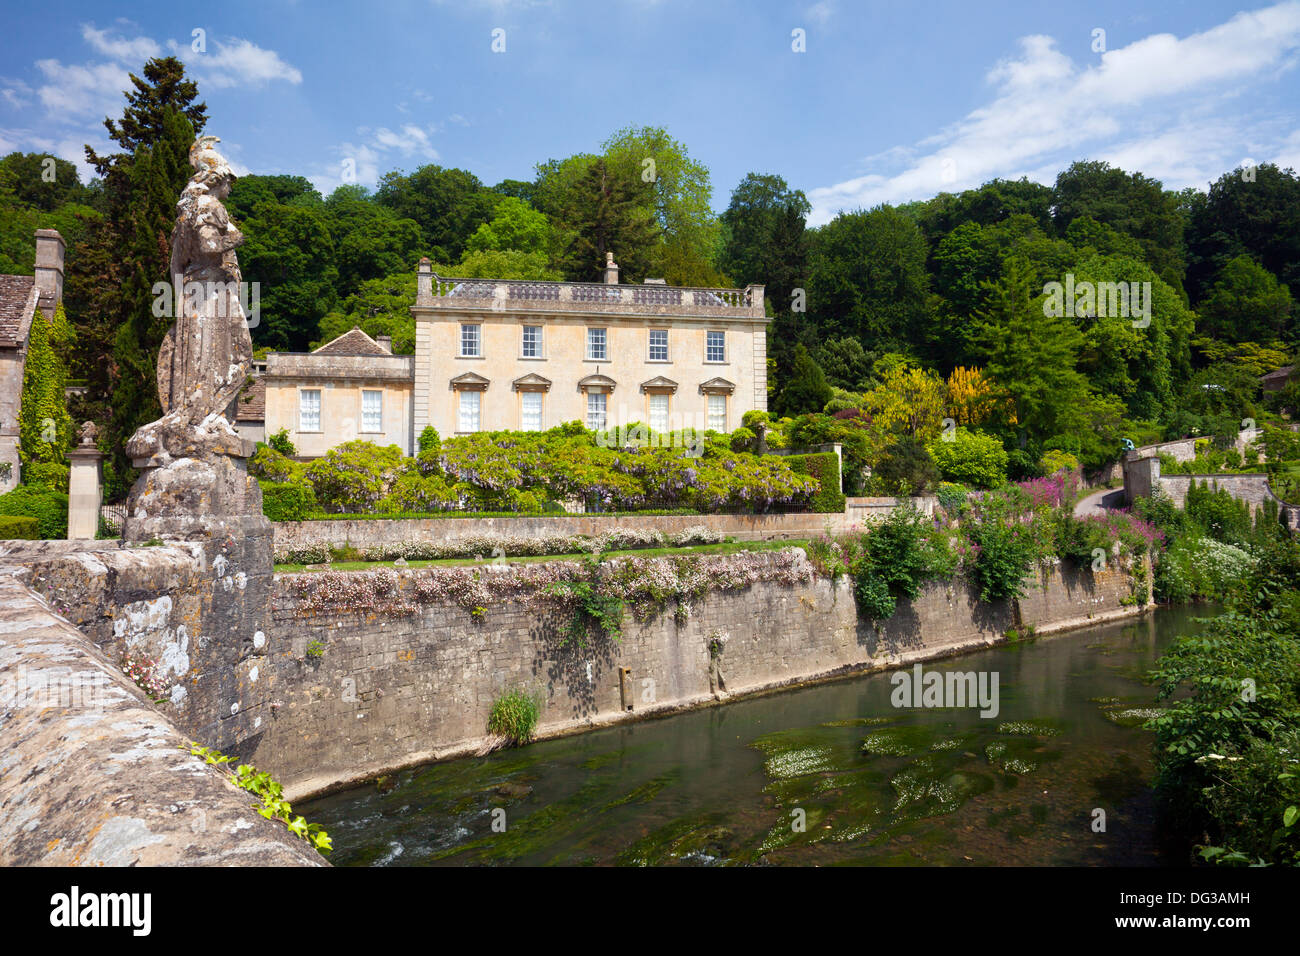 Iford Manor - the home of the Harold Peto Garden on the River Frome nr Bradford on Avon, Wiltshire, England, UK Stock Photo